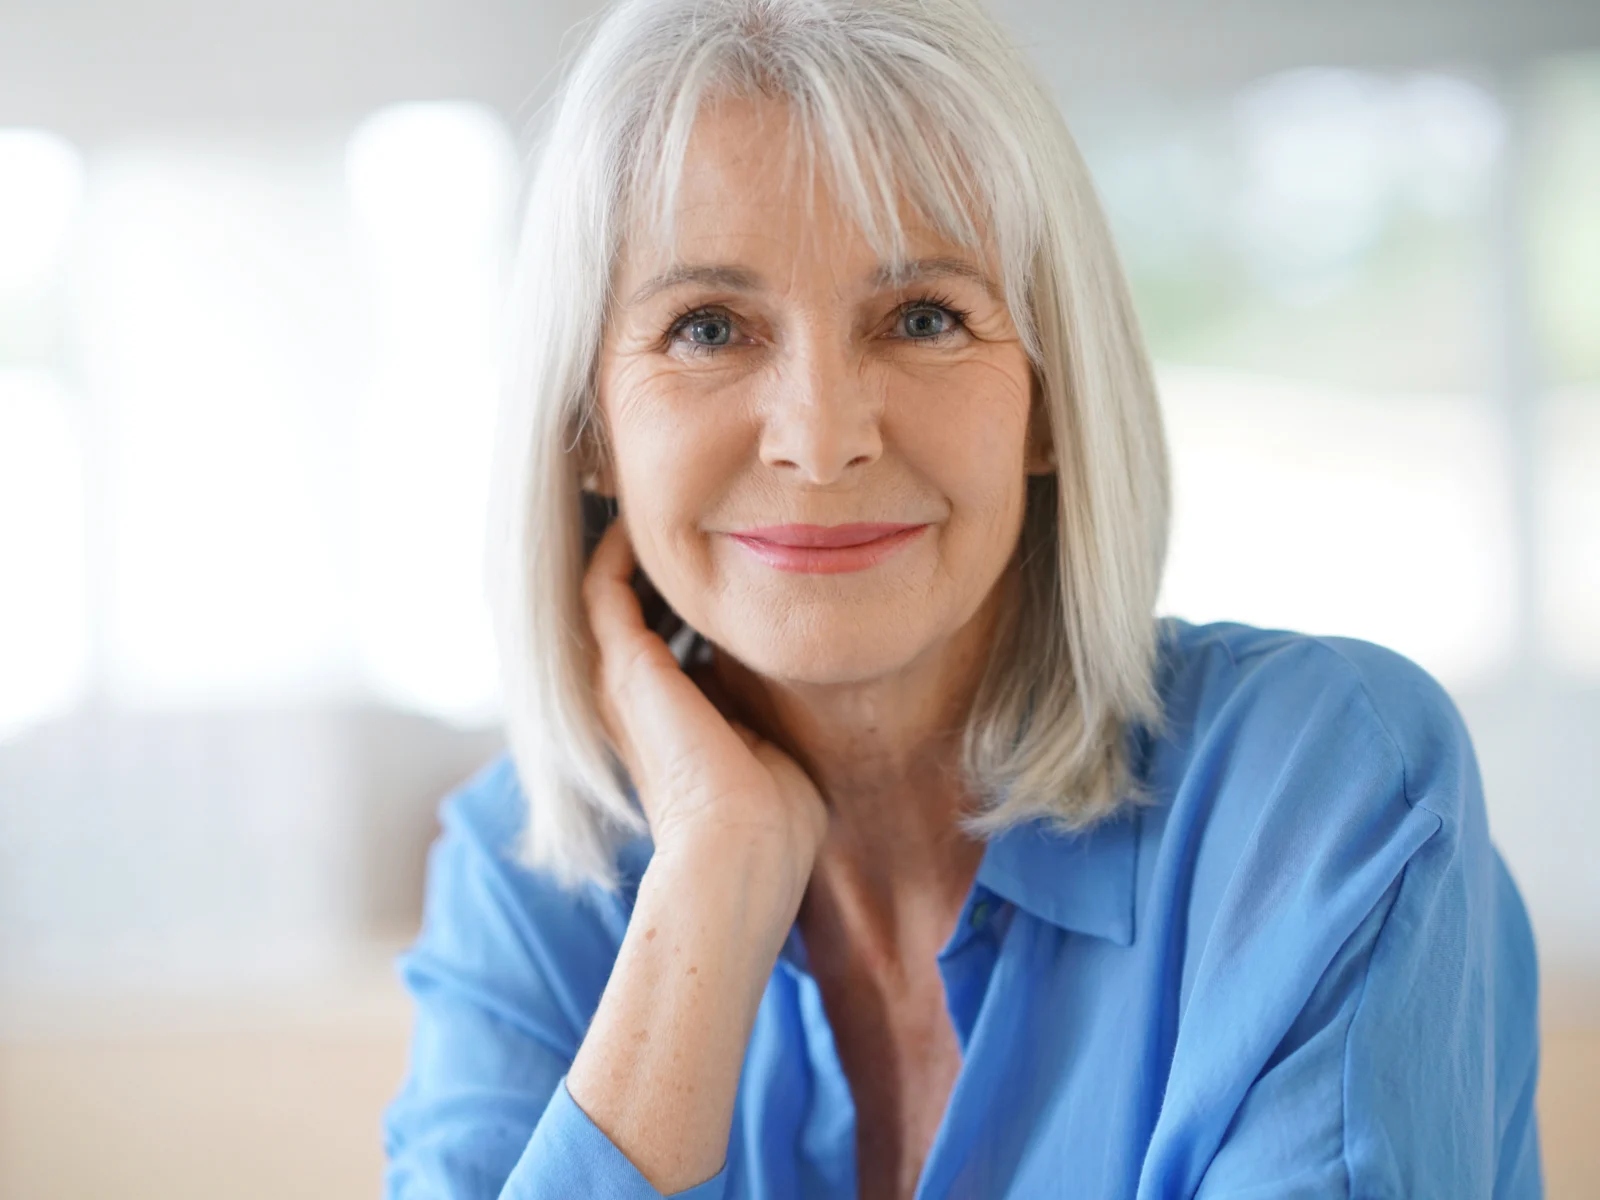 Medium Length With Open, Wispy Bangs for a piece on the best hairstyles for women over 70